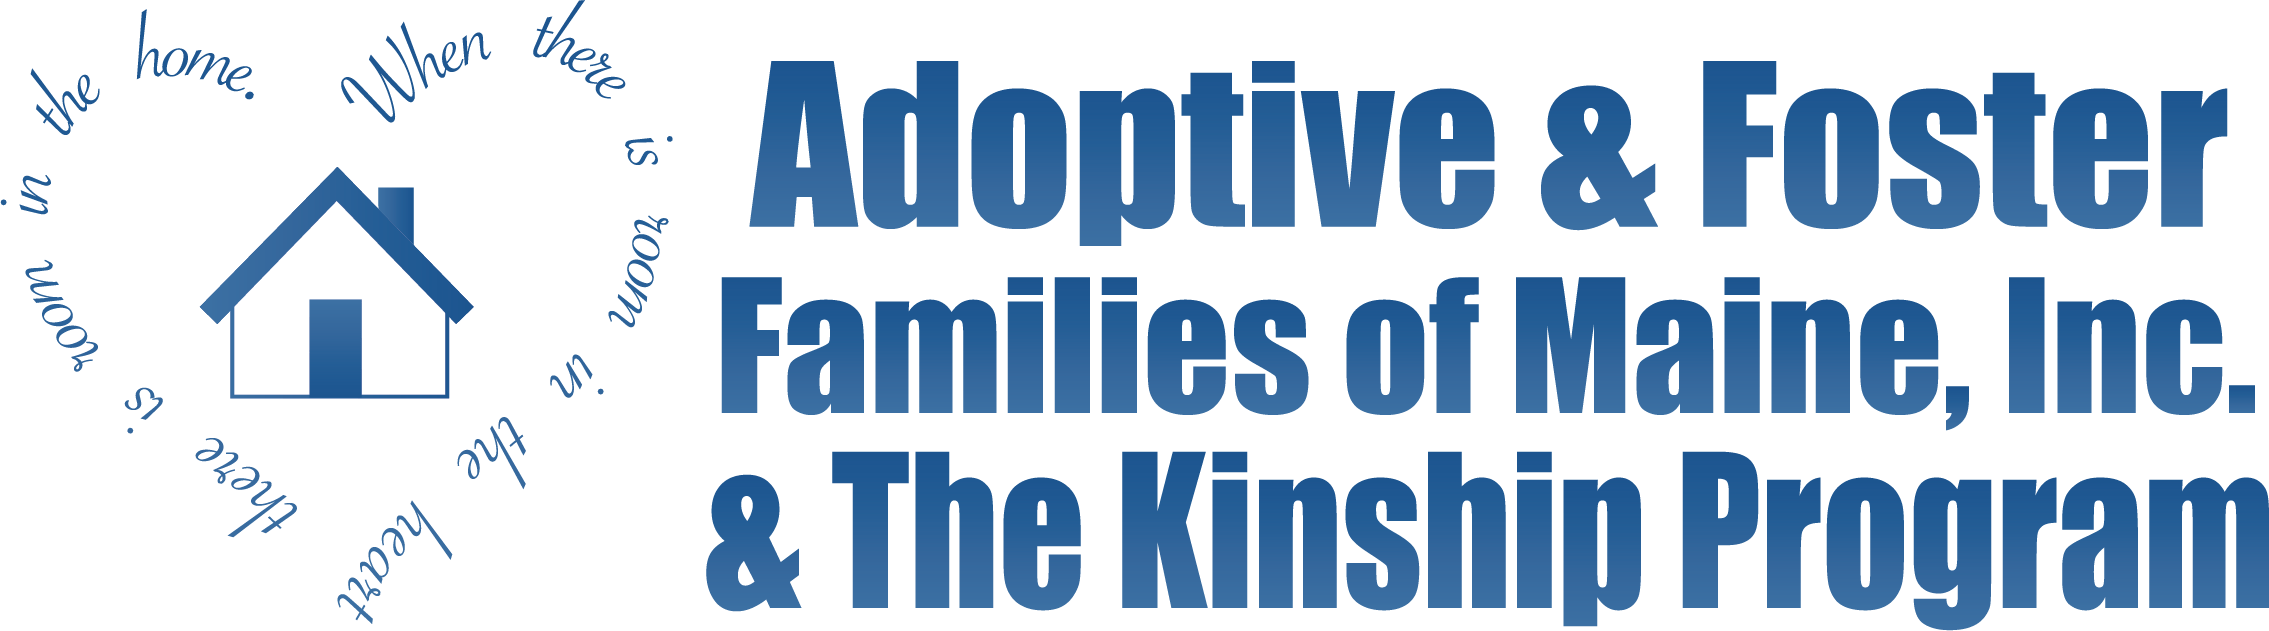 Nonprofits Adoptive Foster Families of Maine Logo FY25 D24 Outdoor Fund Nominee